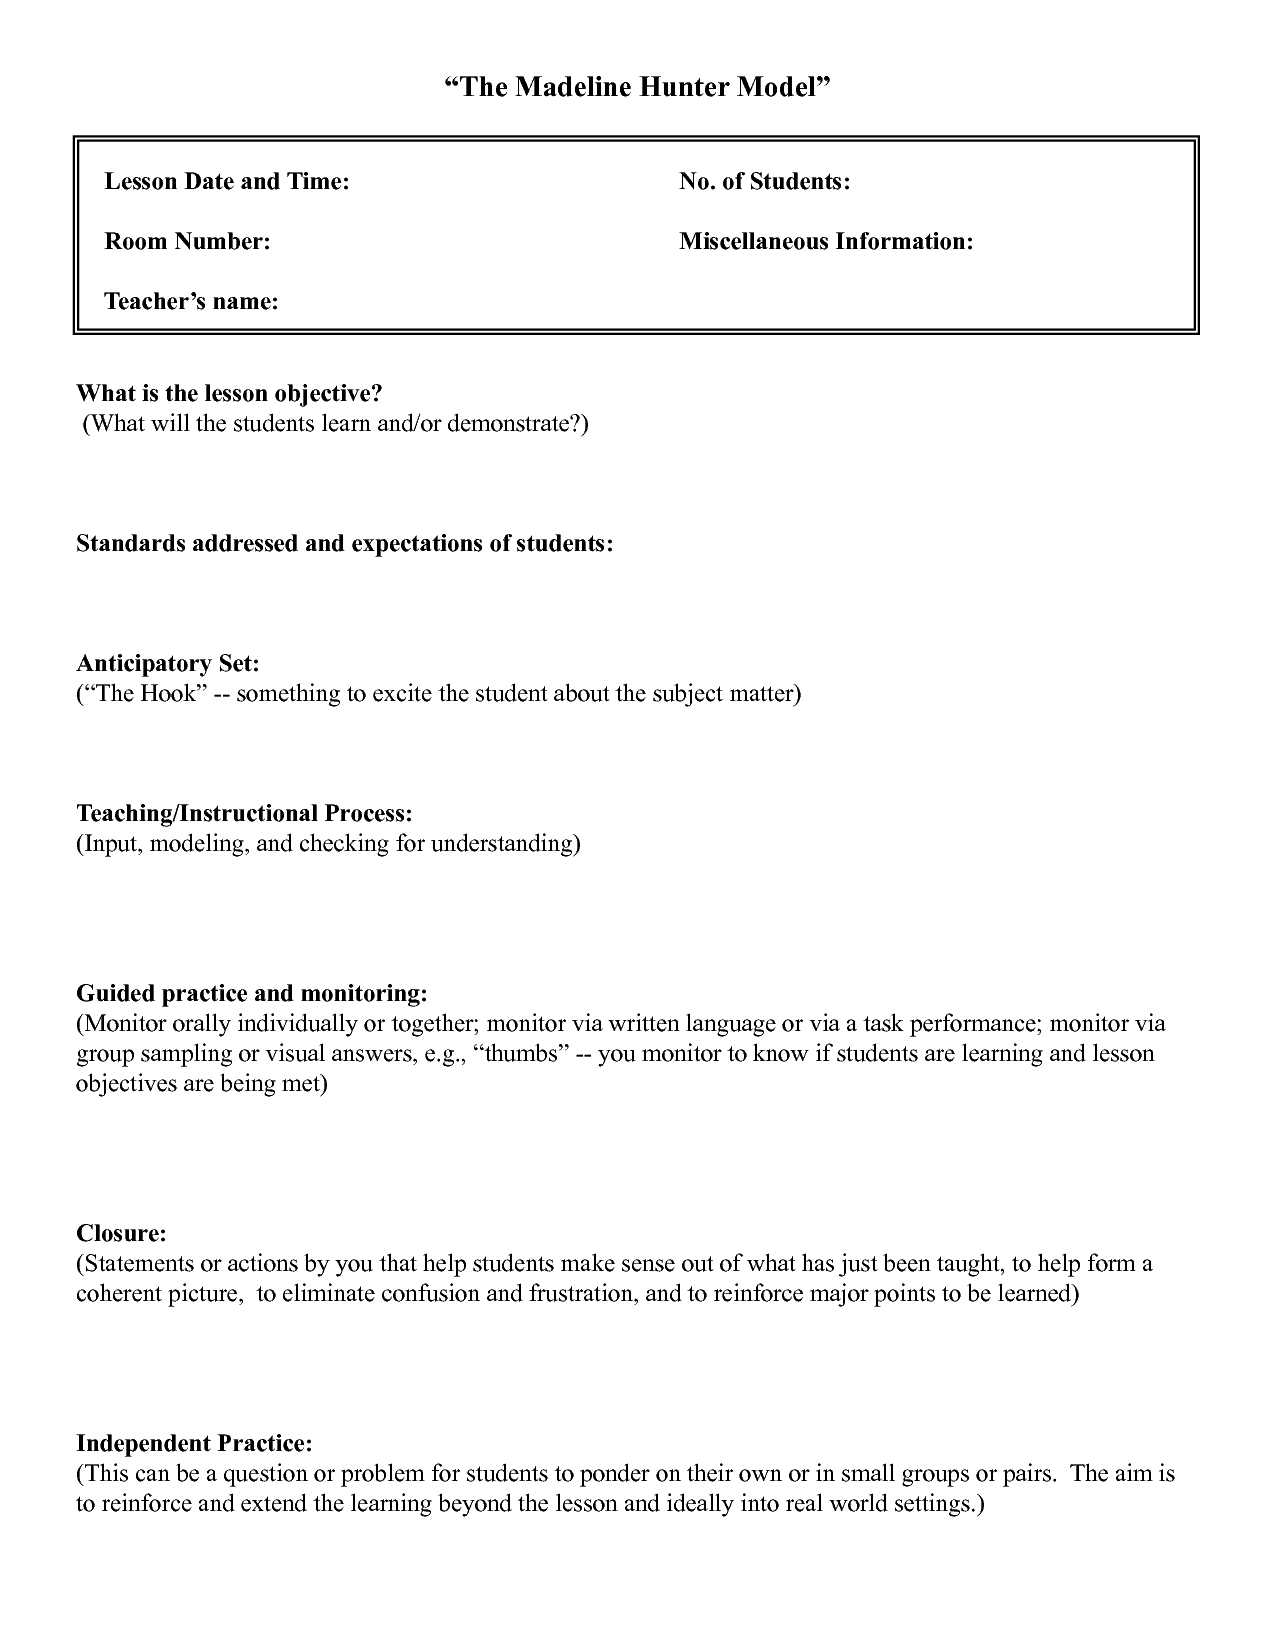 006 Template Ideas Madelineer Lesson Plan Best Business With Madeline Hunter Lesson Plan Template Word